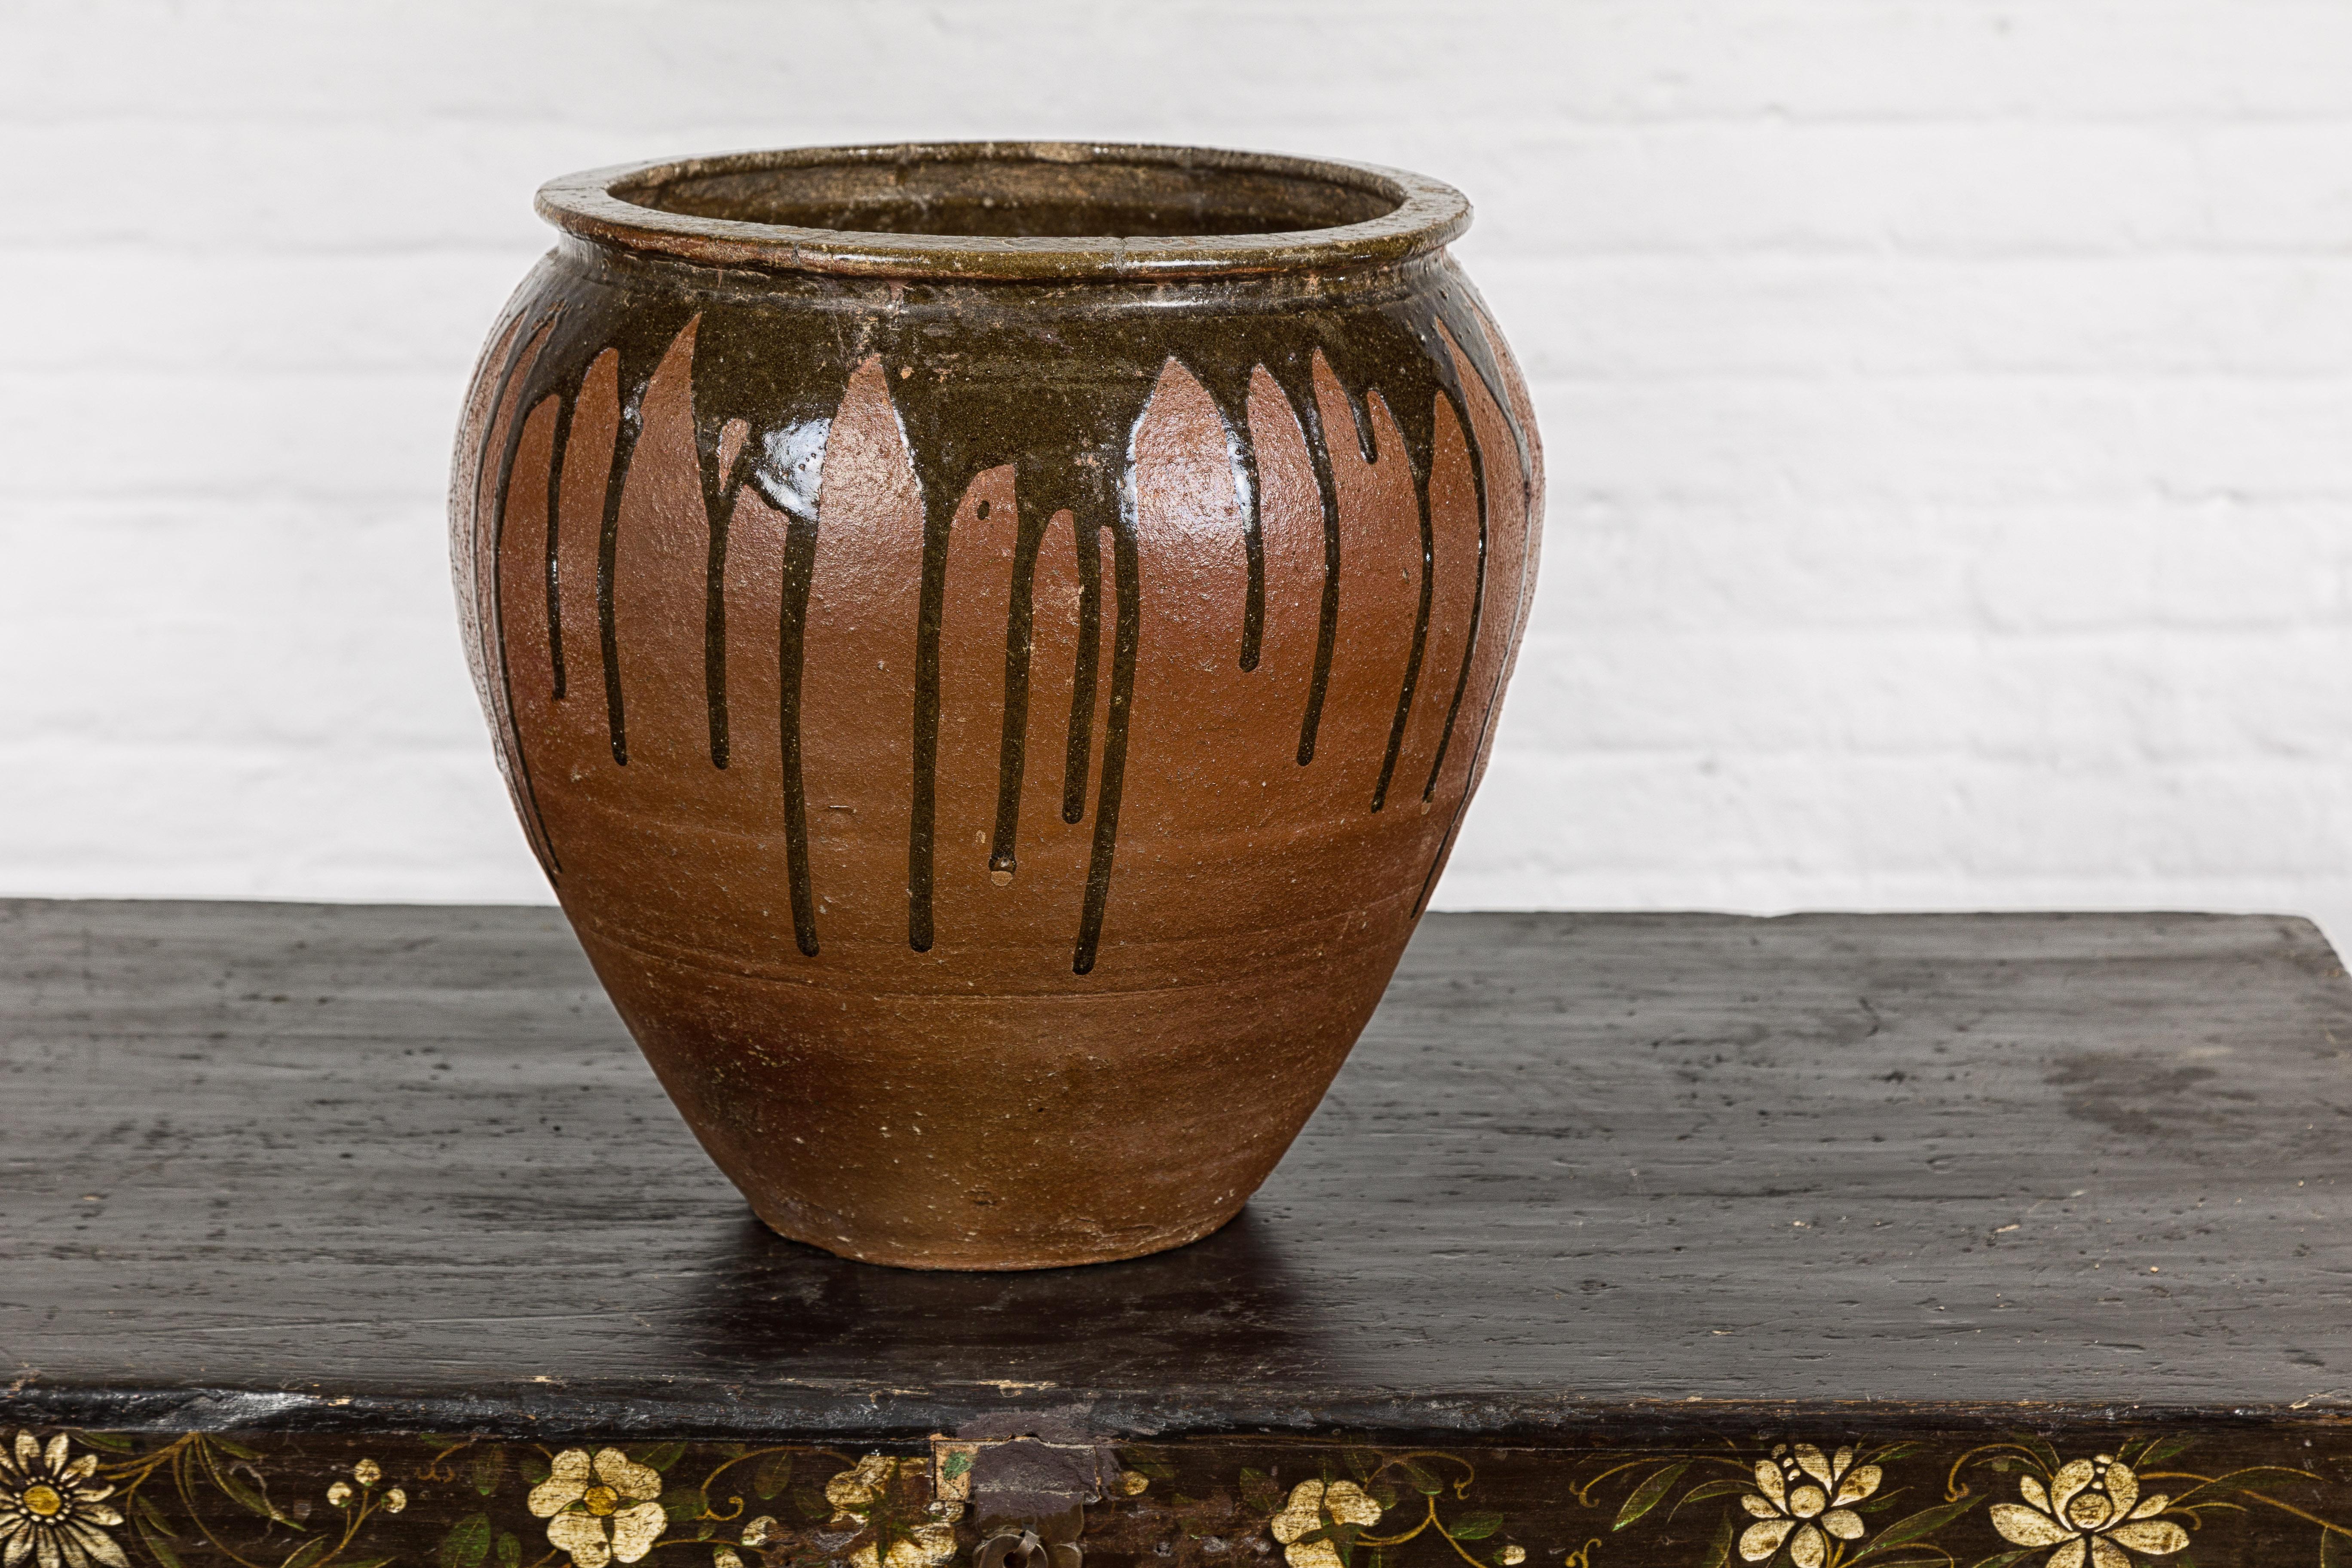 Japanese Tamba Ware Brown Glazed Ceramic Salt Pot Planter with Dripping In Good Condition For Sale In Yonkers, NY